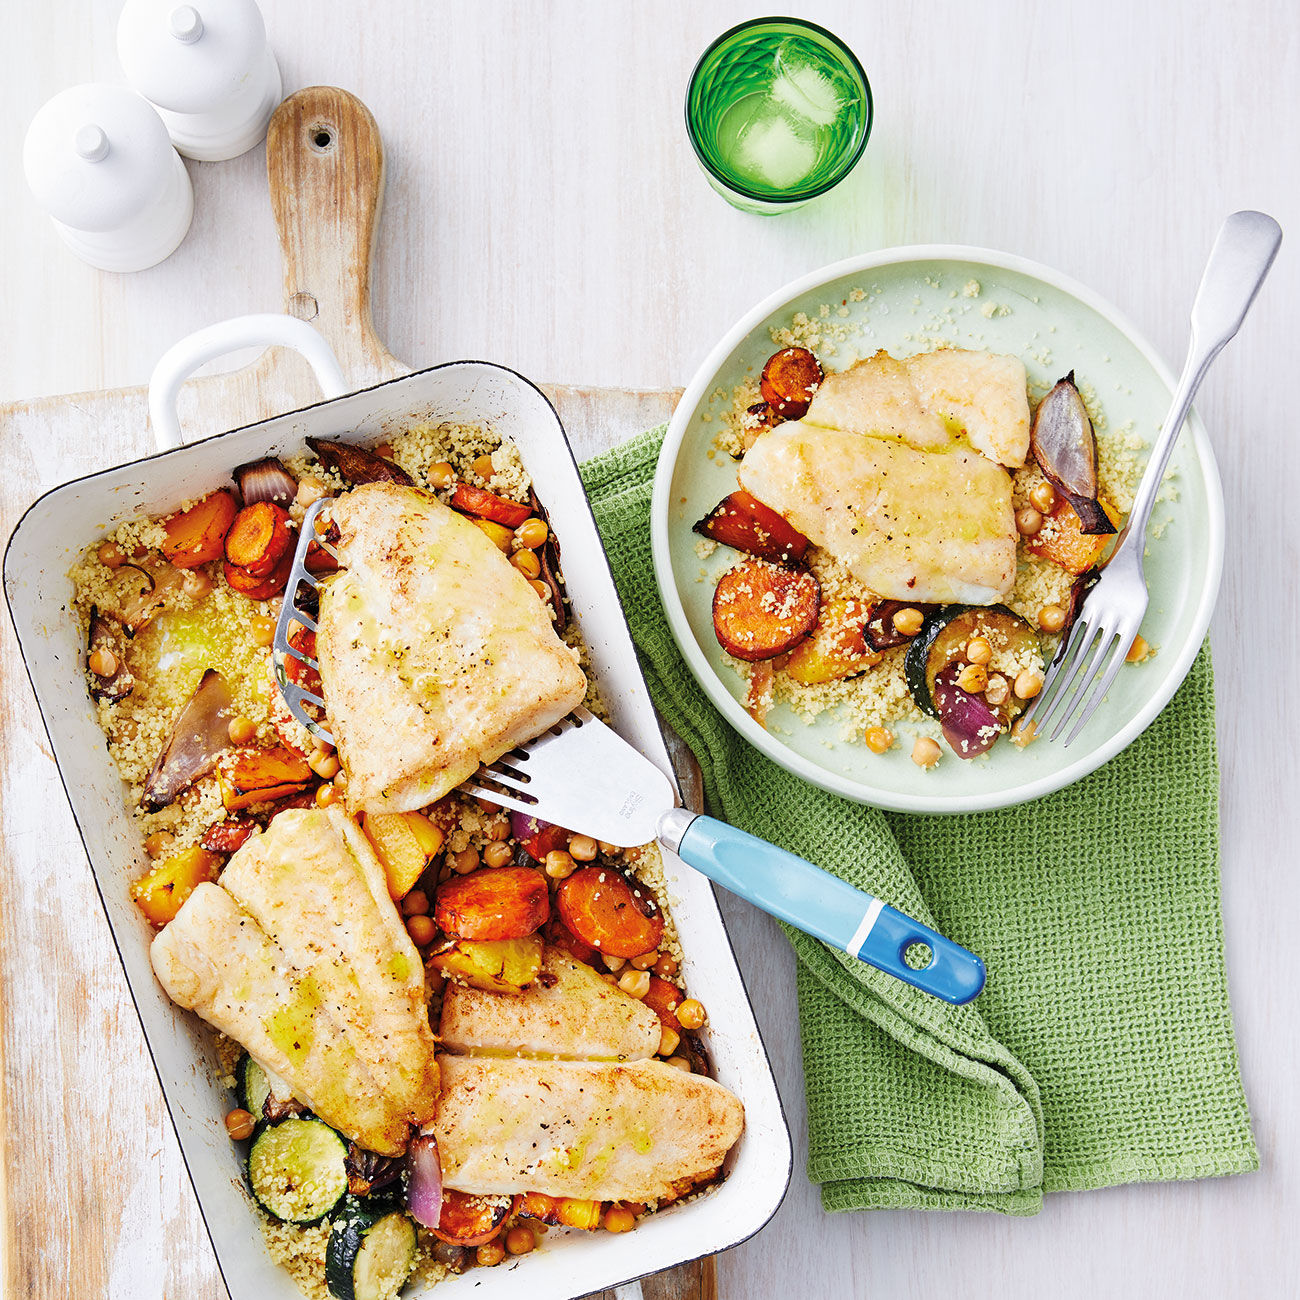 https://foodhub.scene7.com/is/image/woolworthsltdprod/2006-one-tray-fish-and-vegetable-bake:Square-1300x1300